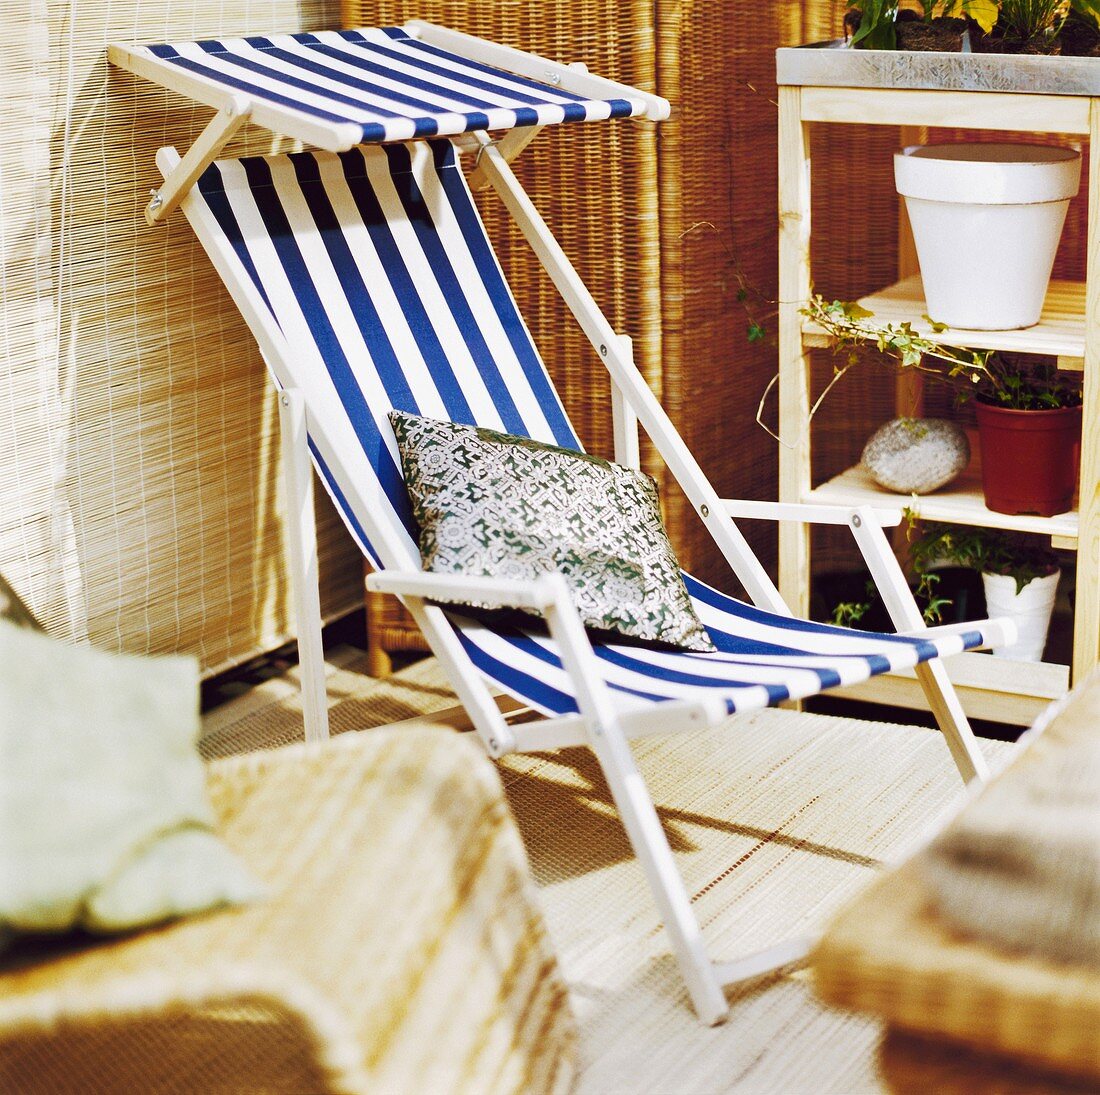 Blue and white striped deckchair on a terrace